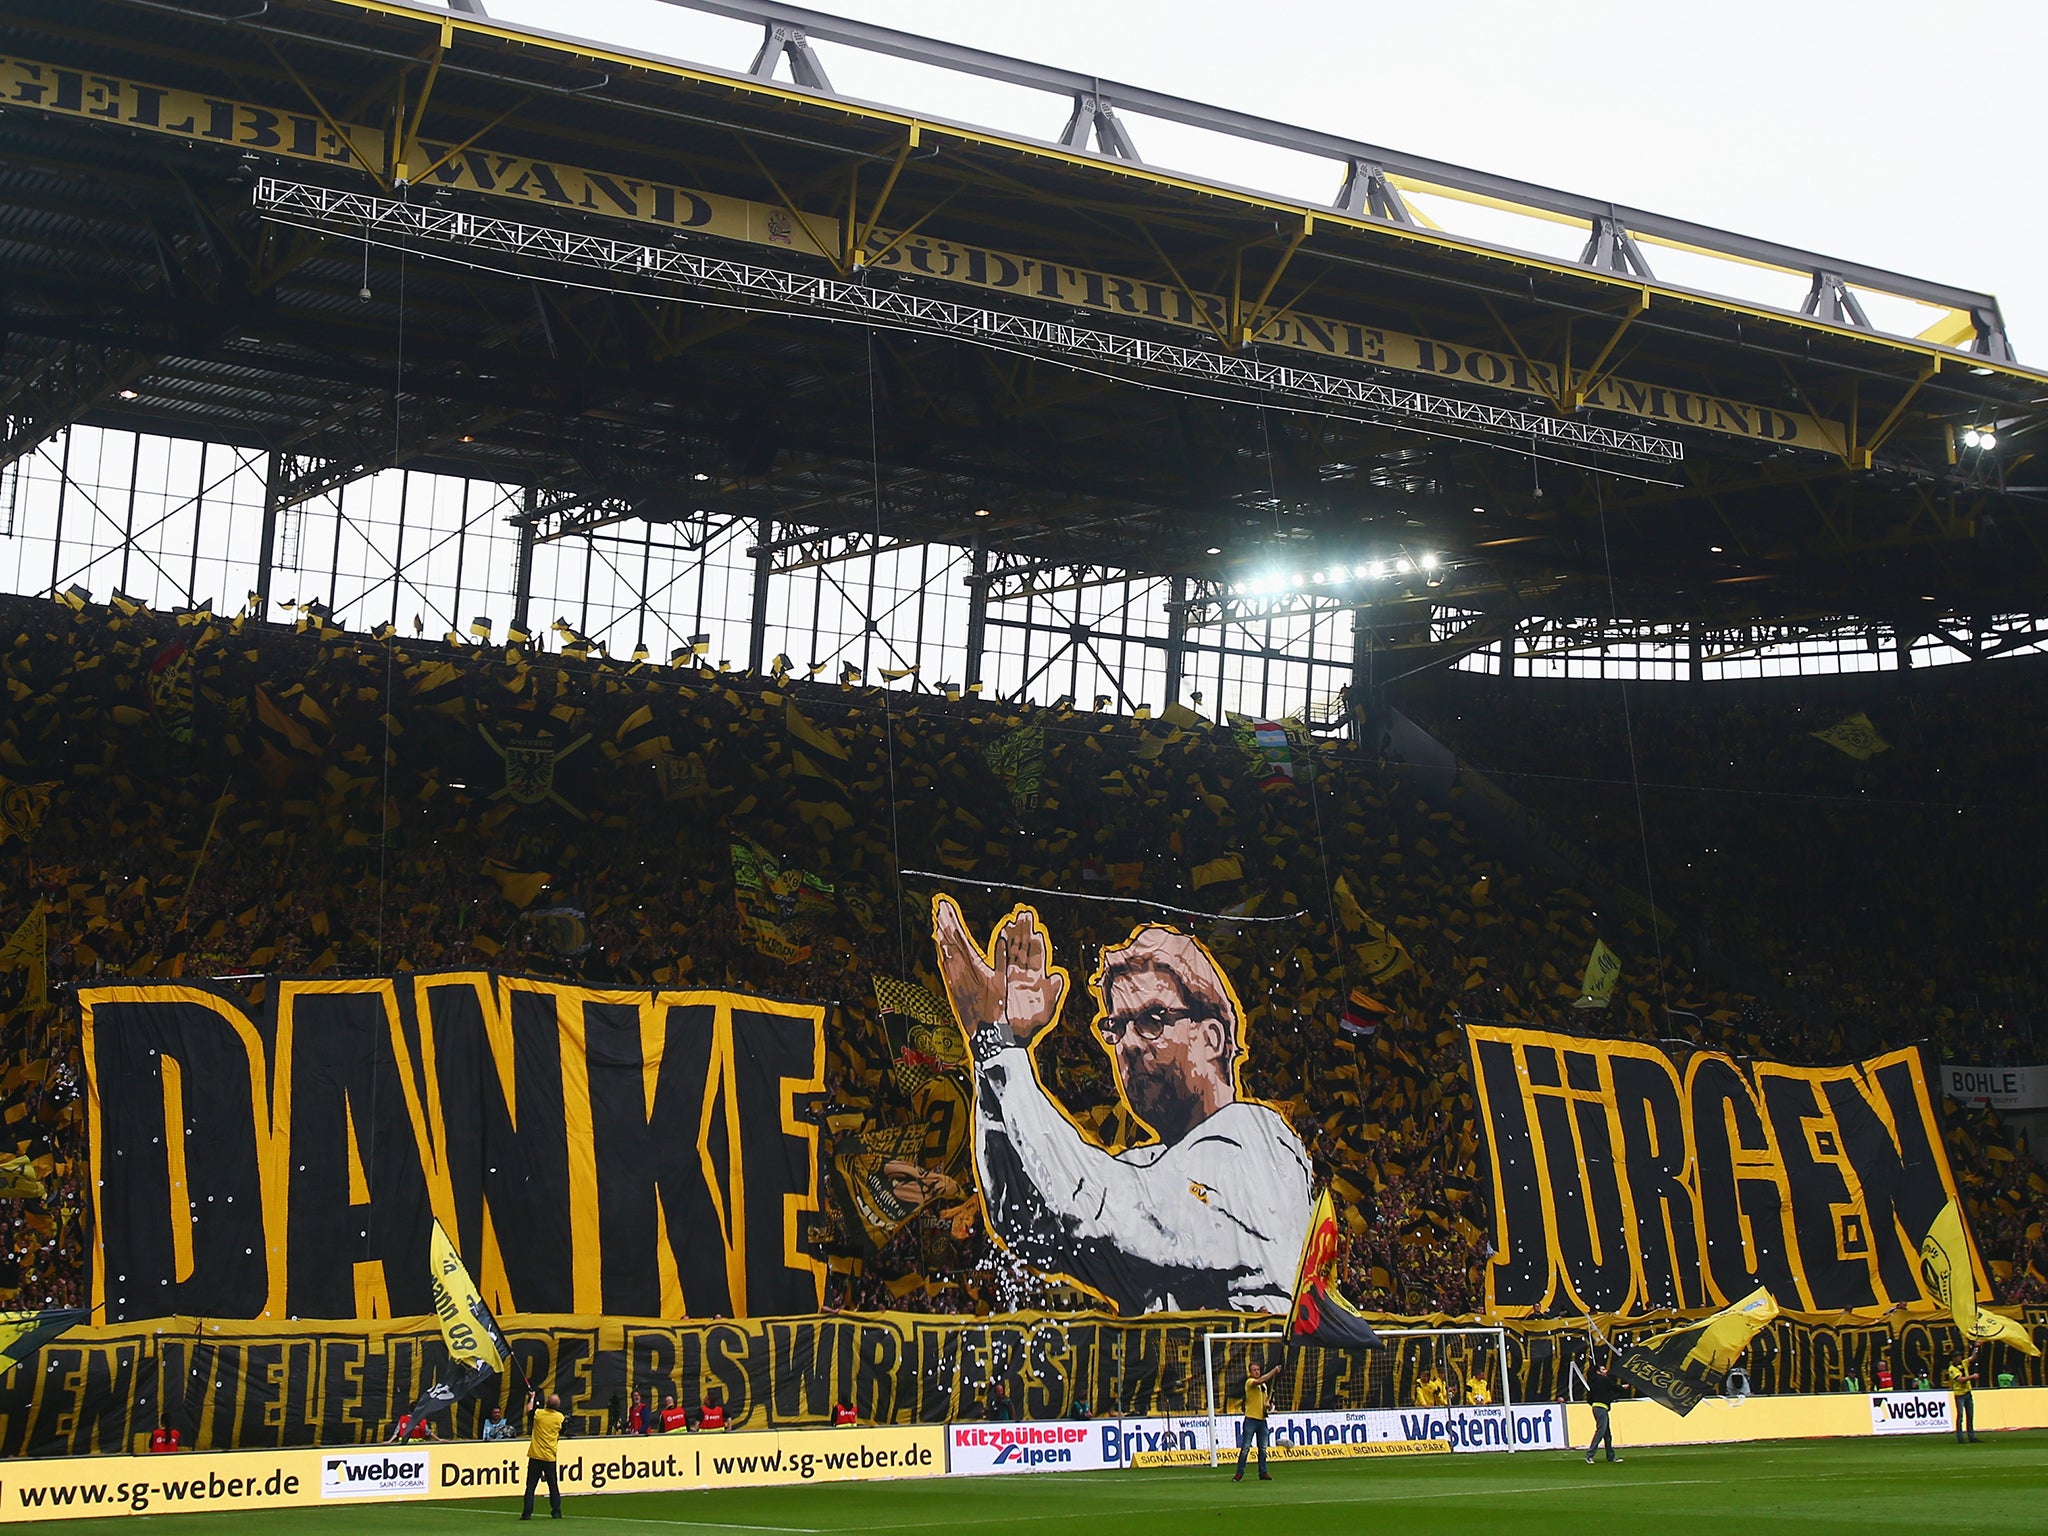 A giant tifo in tribute to Jurgen Klopp is unveiled ahead of Borussia Drotmund's final game